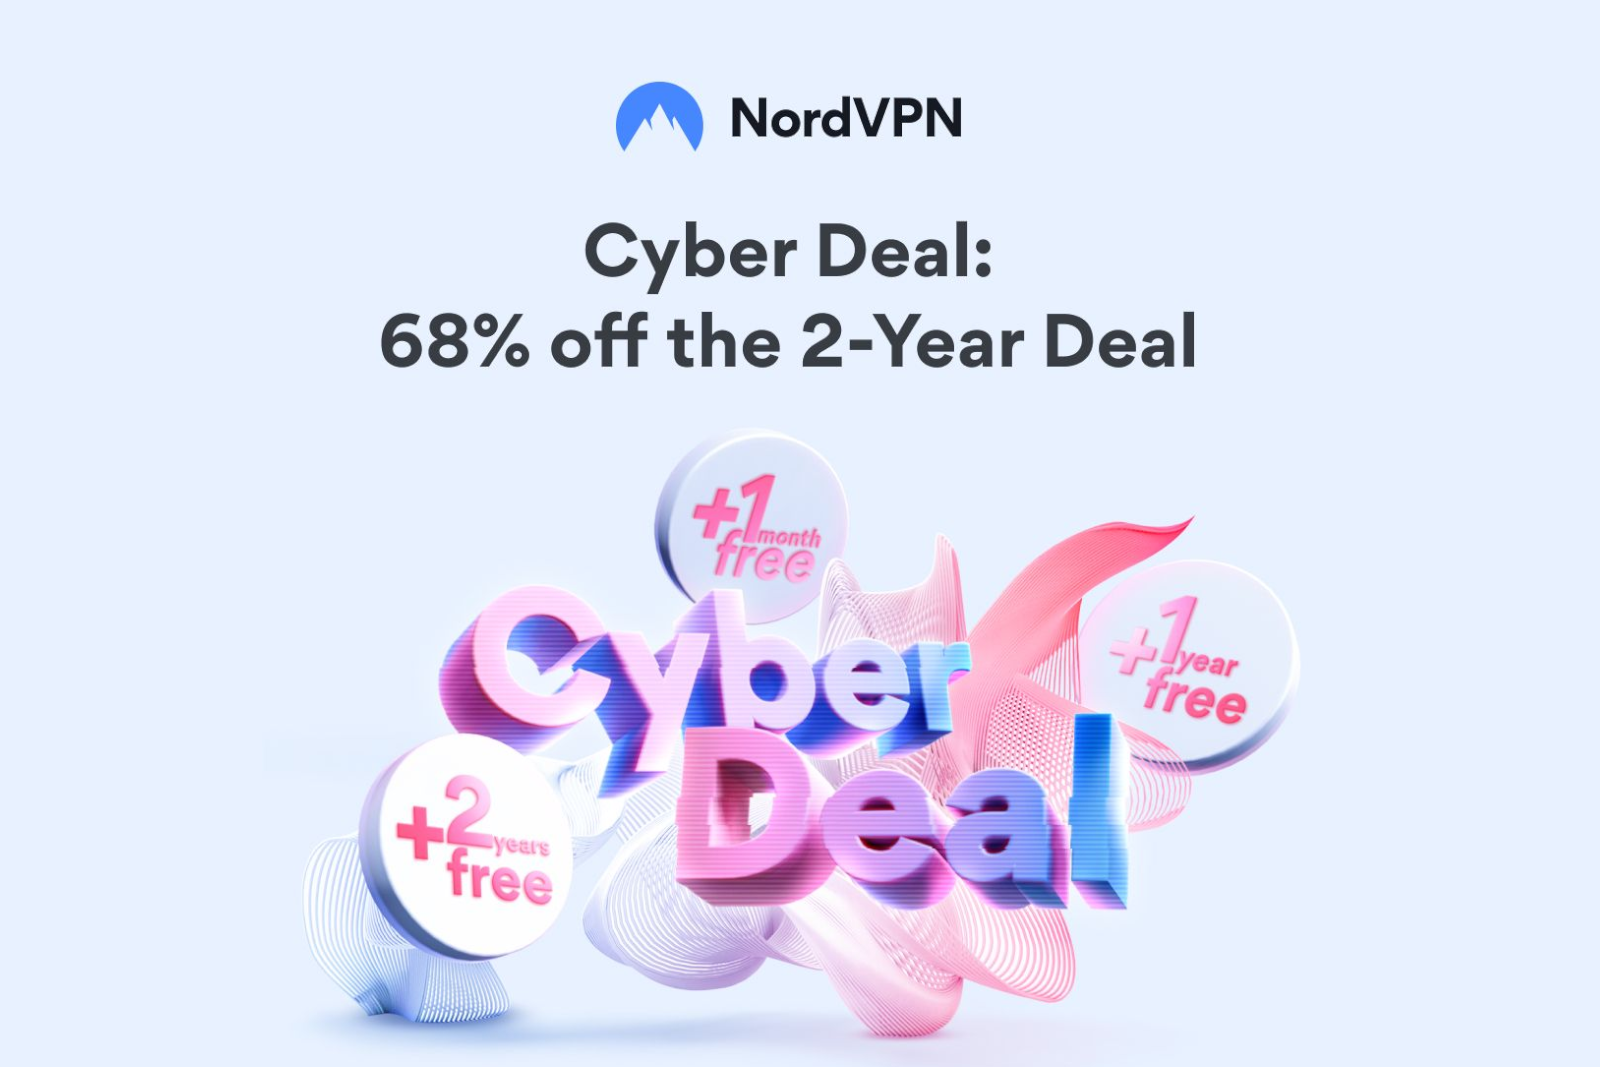 NordVPN's massive Cyber Deal is a lucky dip of savings photo 1